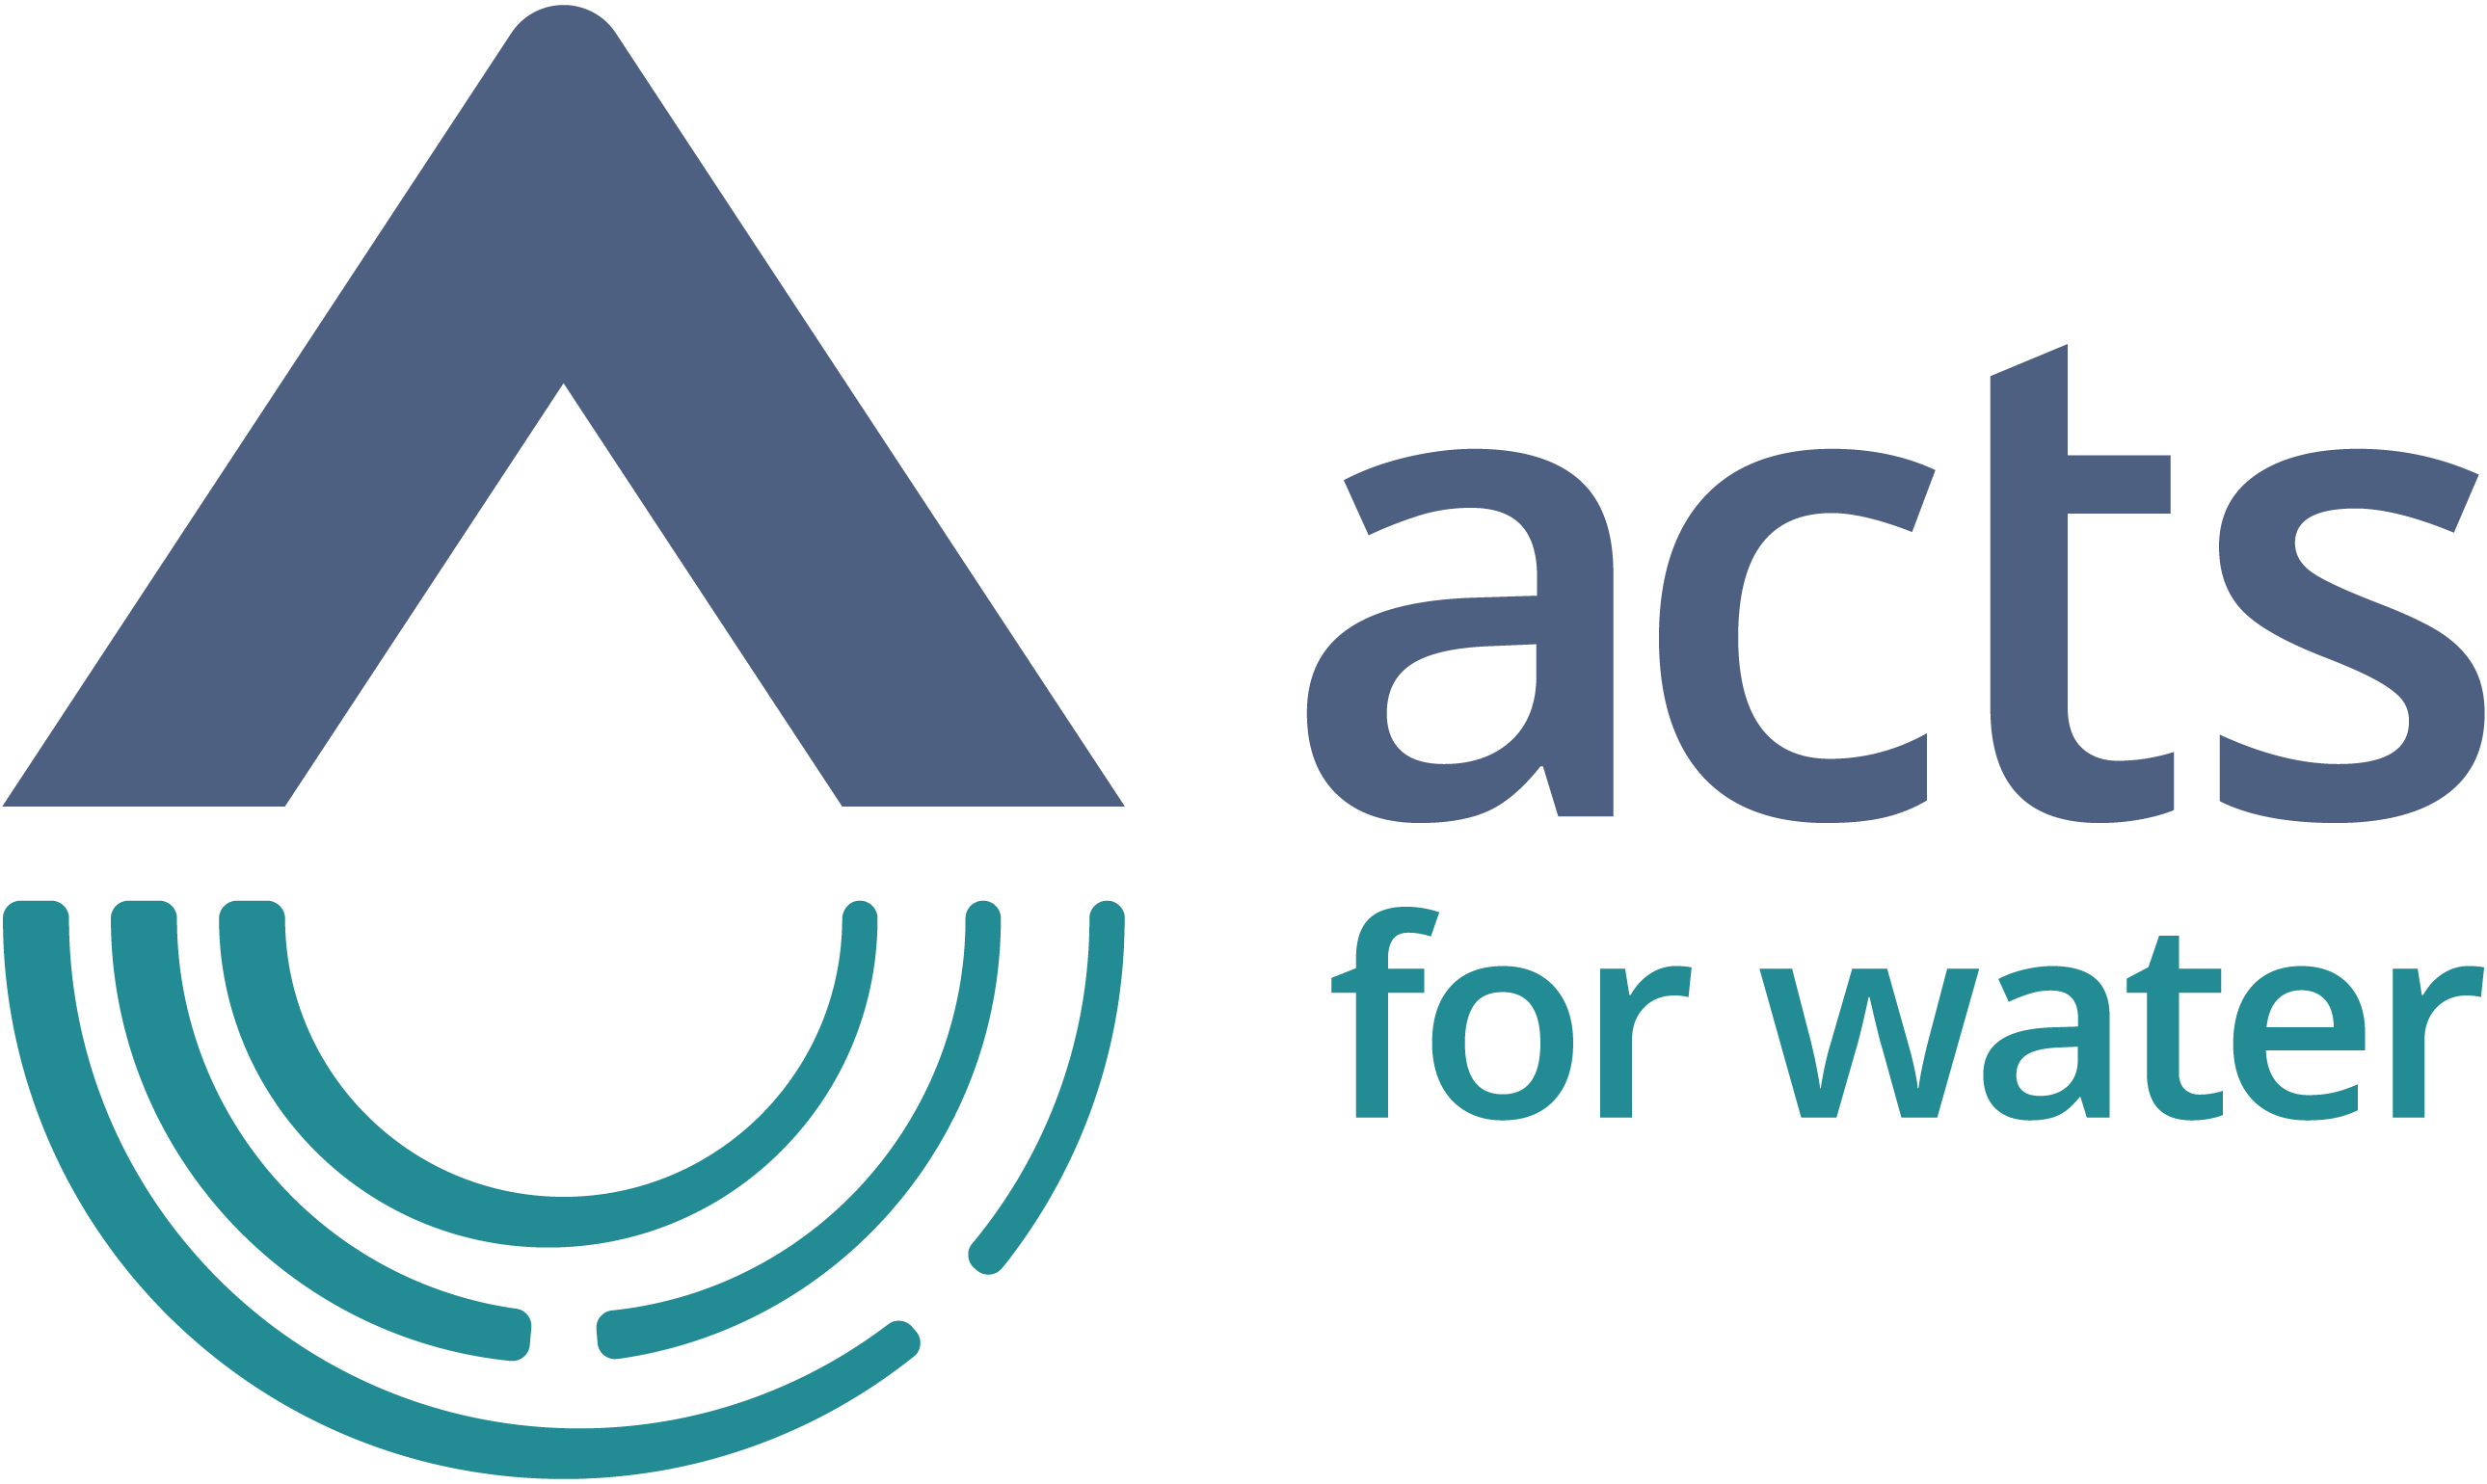 acts for water logo with a droplet symbol